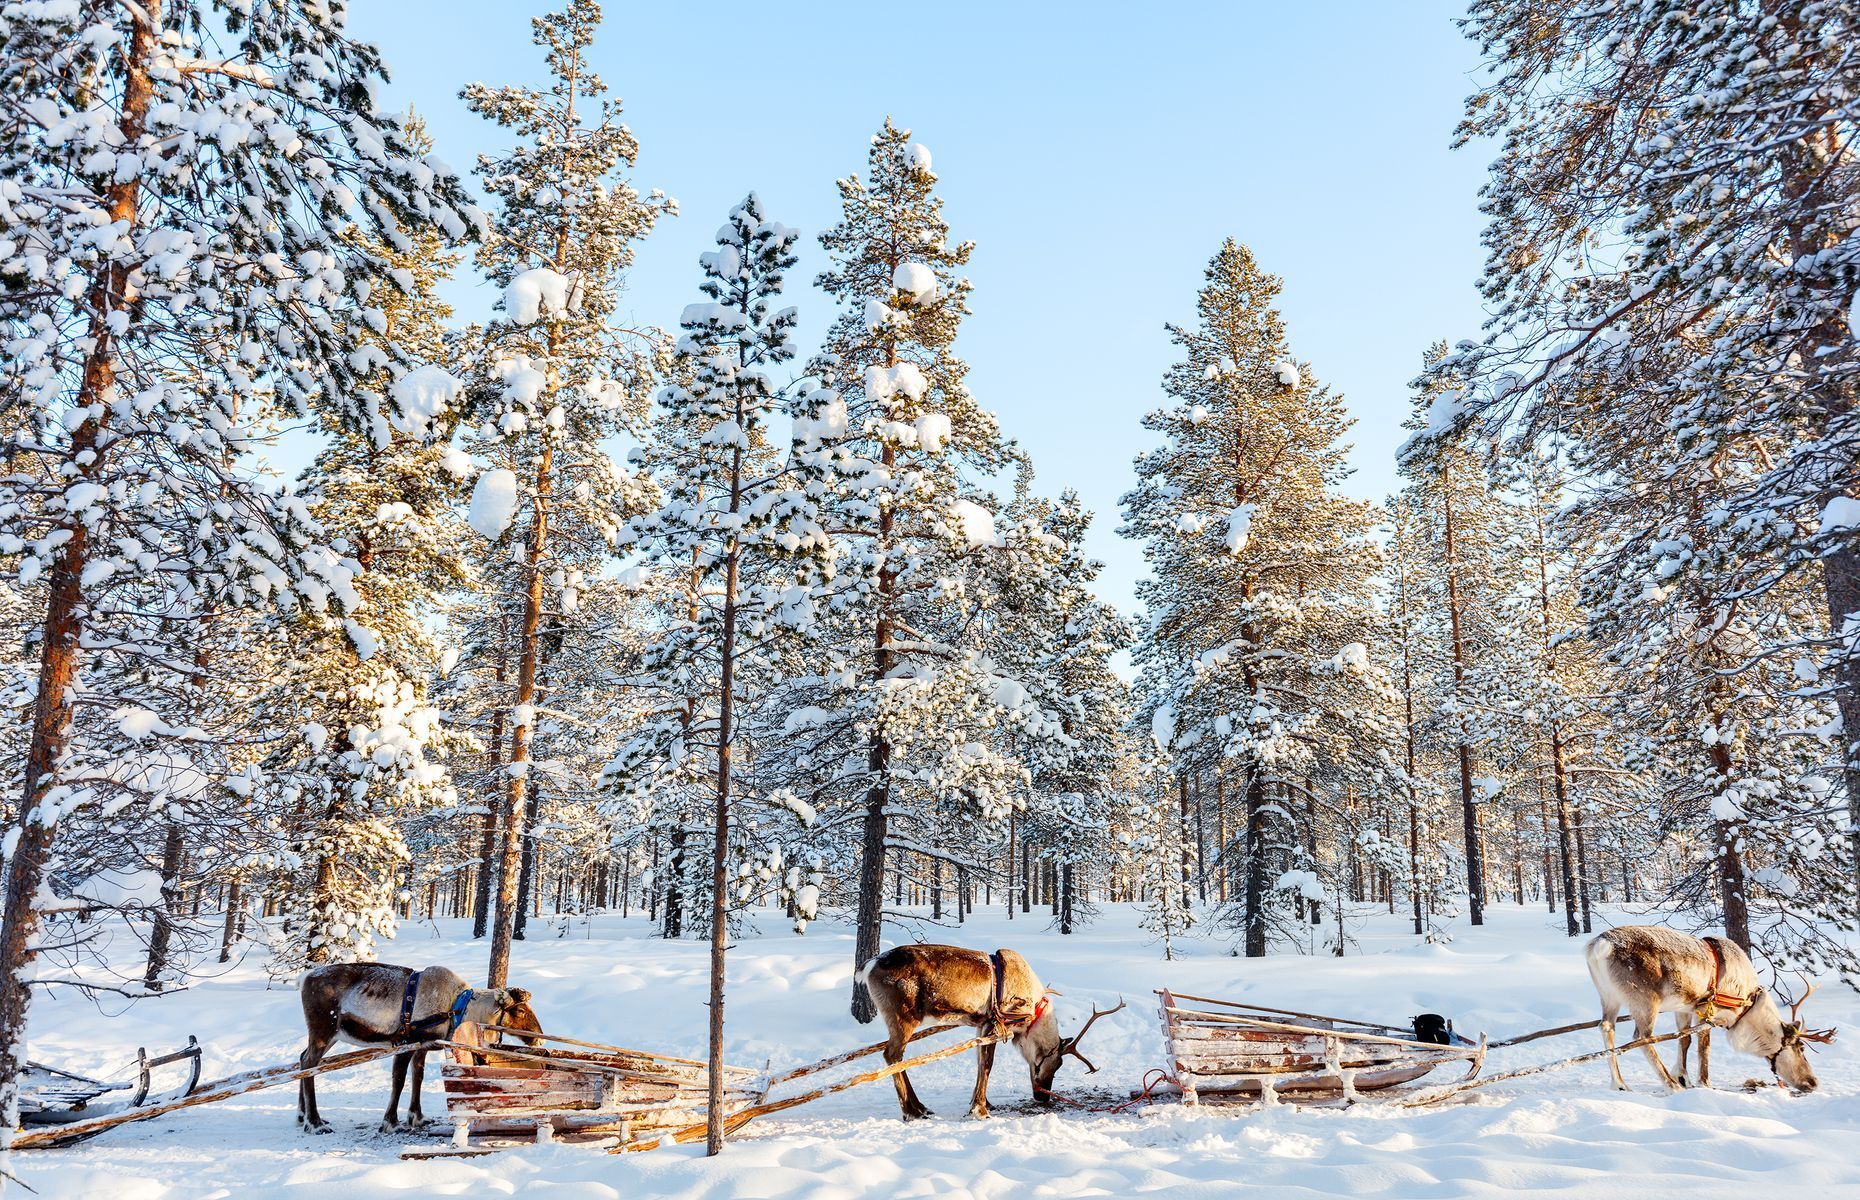 <p><a href="https://www.swedishlapland.com/" rel="noreferrer noopener">Lapland</a>, Sweden’s northernmost region, covers over a <a href="https://visitsweden.com/where-to-go/northern-sweden/swedish-lapland/" rel="noreferrer noopener">quarter of the country’s territory</a> and shares borders with Norway and Finland. Renowned for its majestic reindeer and spectacular winter scenery, Lapland is perfect for enjoying sports like skiing, hiking, and fishing.</p>